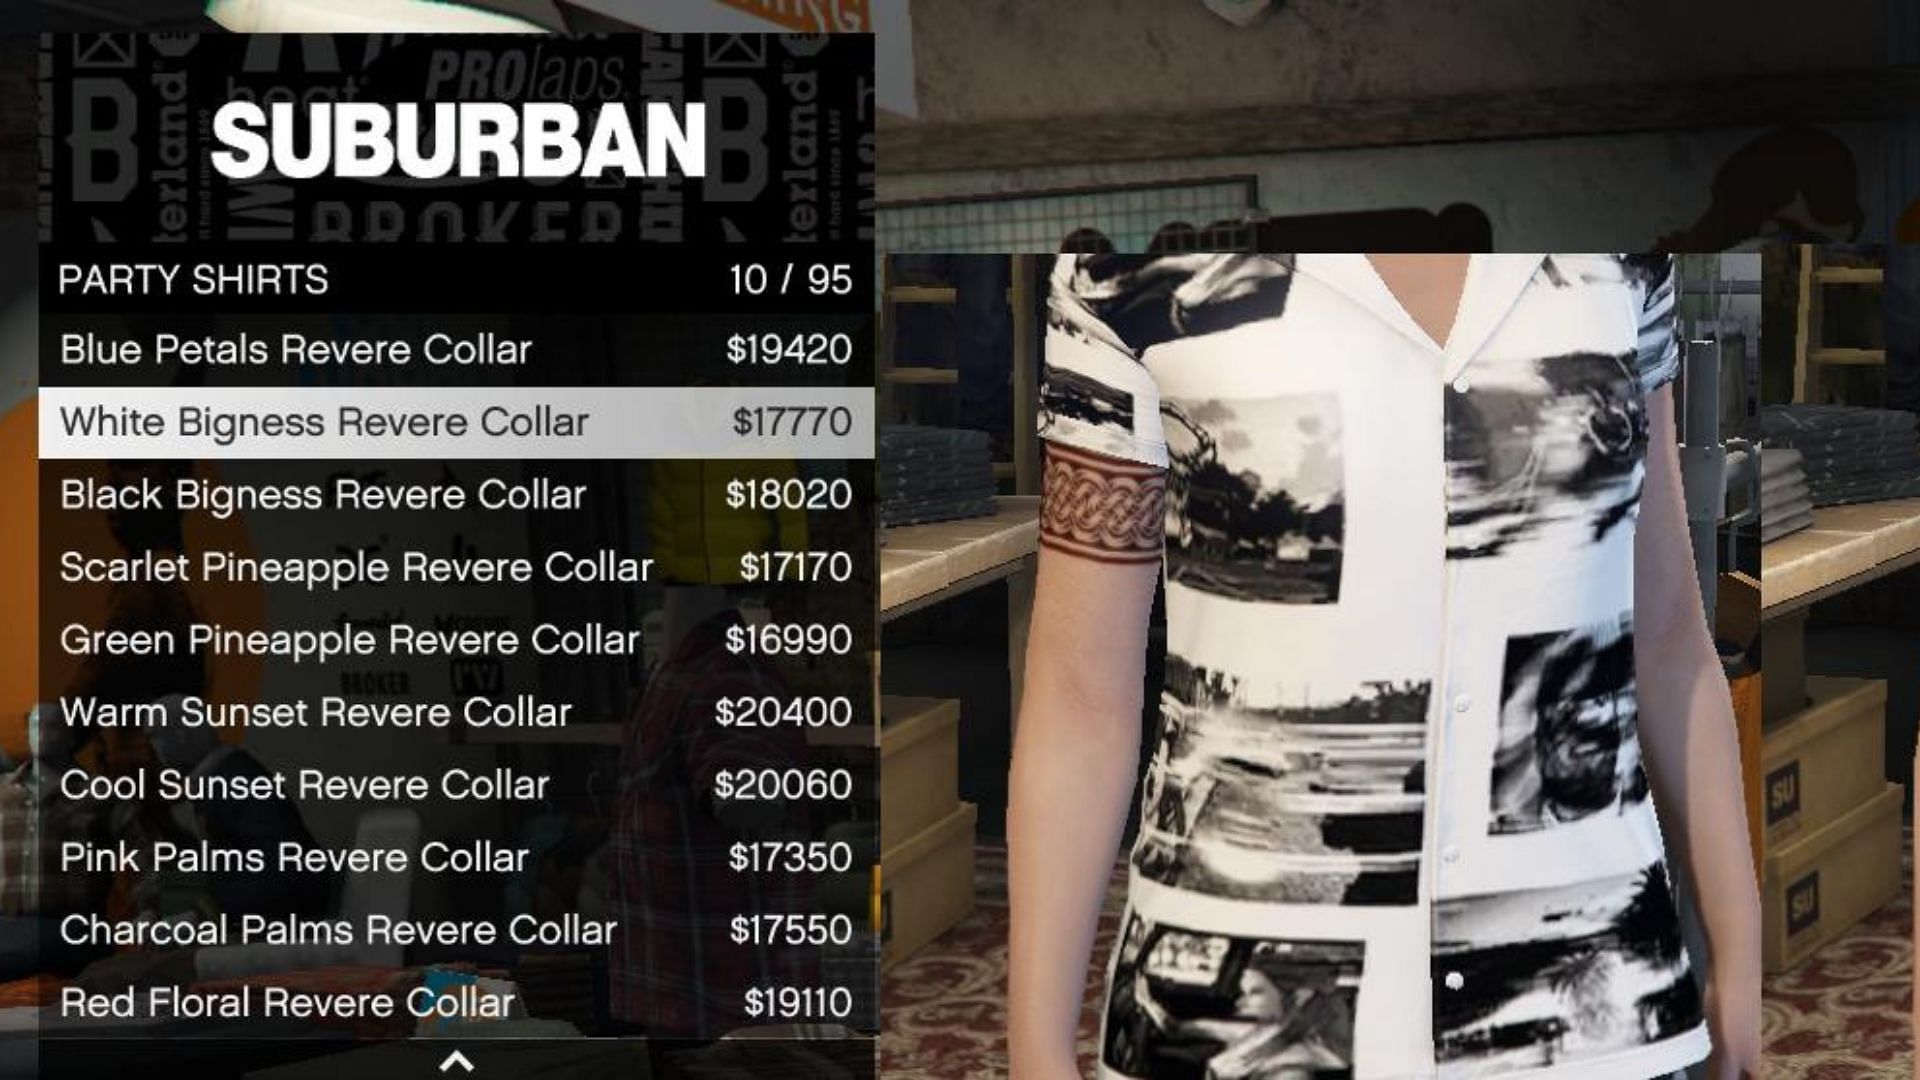 Fan claims to have found first GTA 6 hint in the new GTA Online shirt (Image via u/bbb2222b on Reddit) 